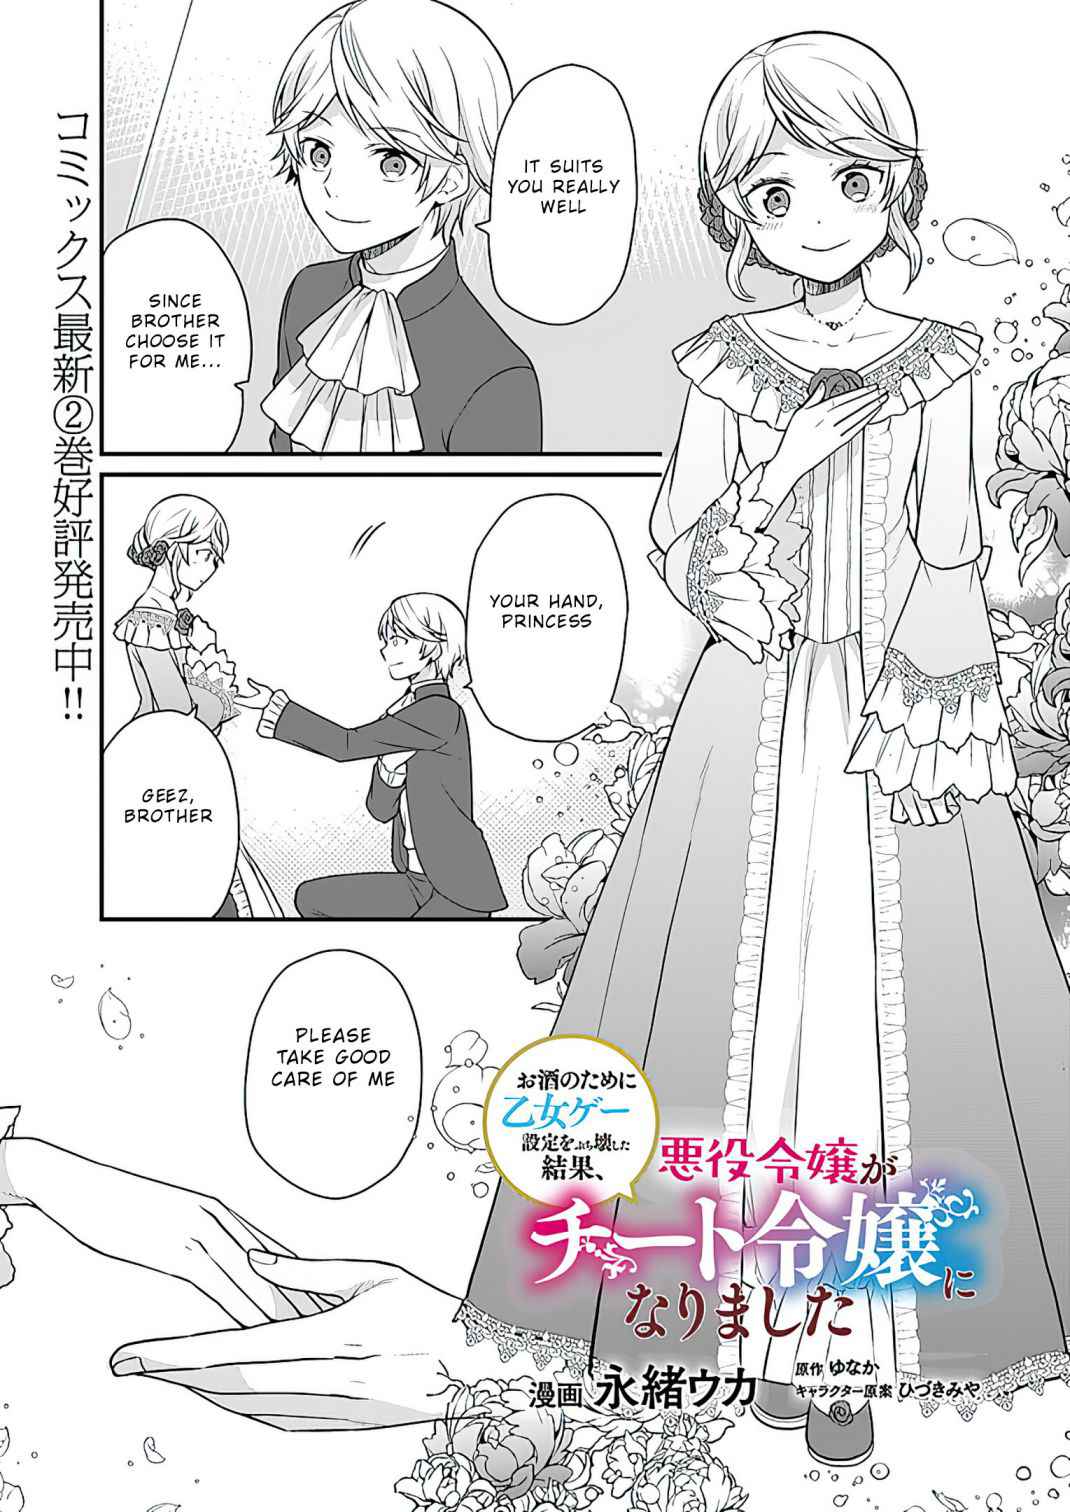 Because Of Her Love For Sake, The Otome Game Setting Was Broken And The Villainous Noblewoman Became The Noblewoman With Cheats - Page 2